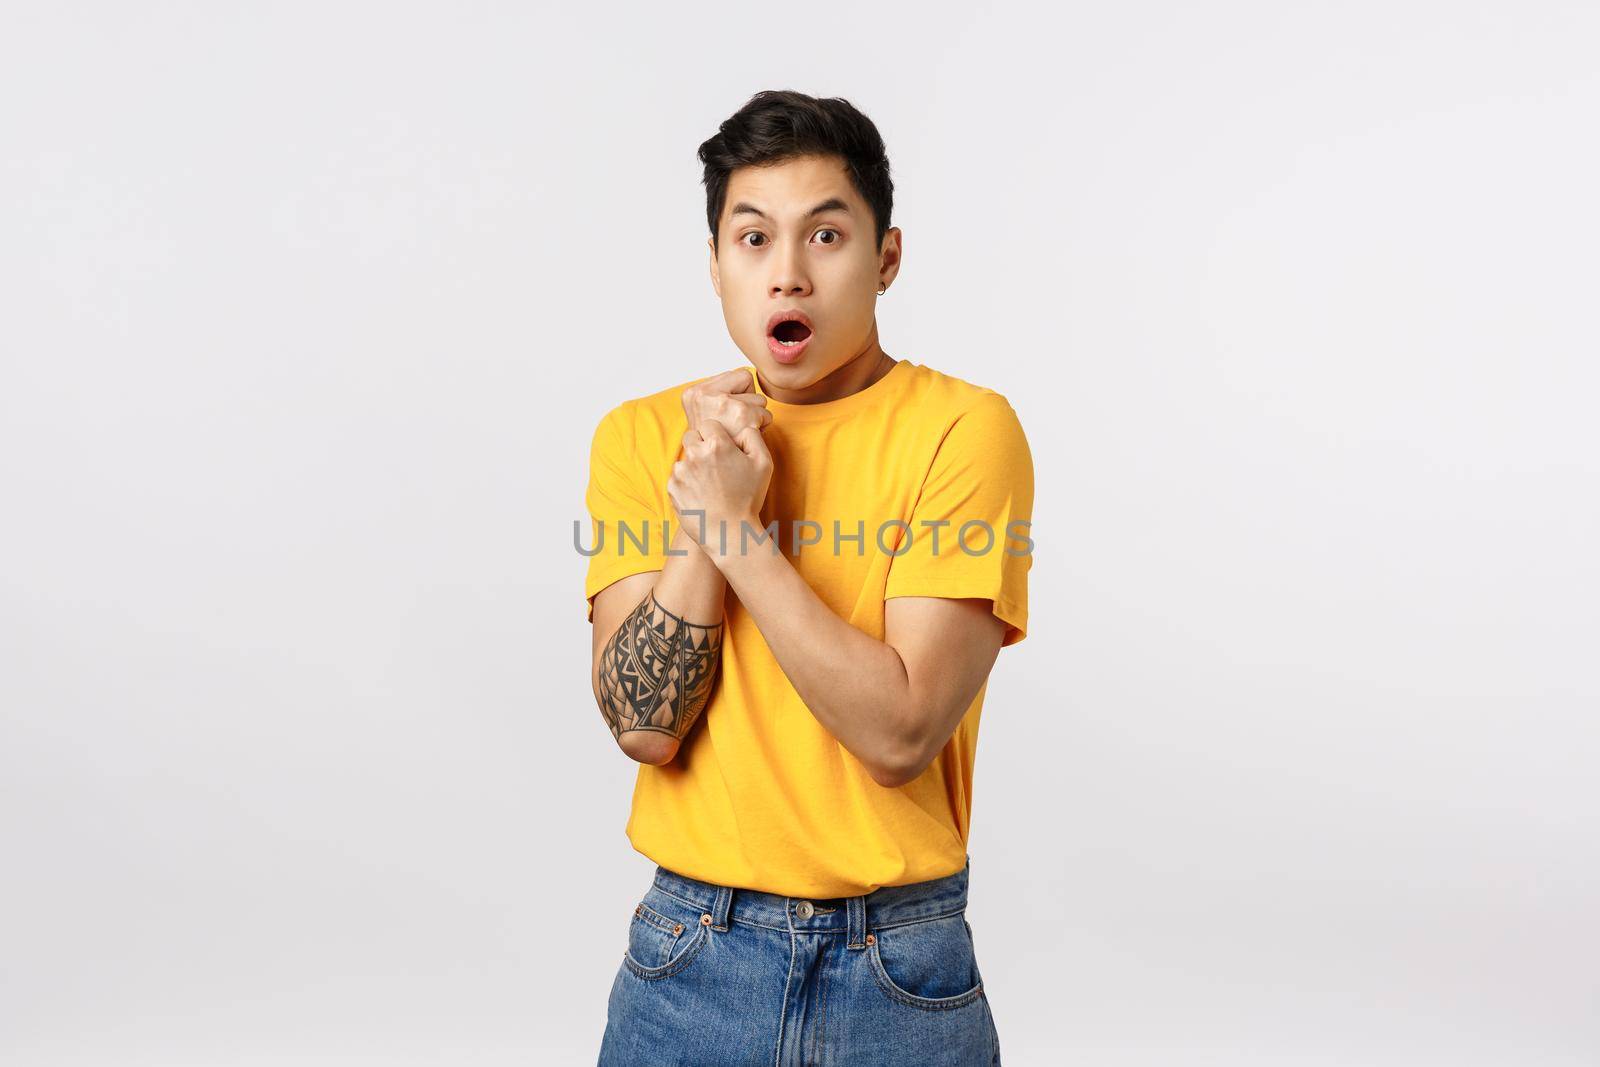 Sensetive and shocked, scared young asian guy with tattoos, pull hand back, press arm to chest insecure and afraid, gasping open mouth, look like victim at someone abuse him, stand white background.